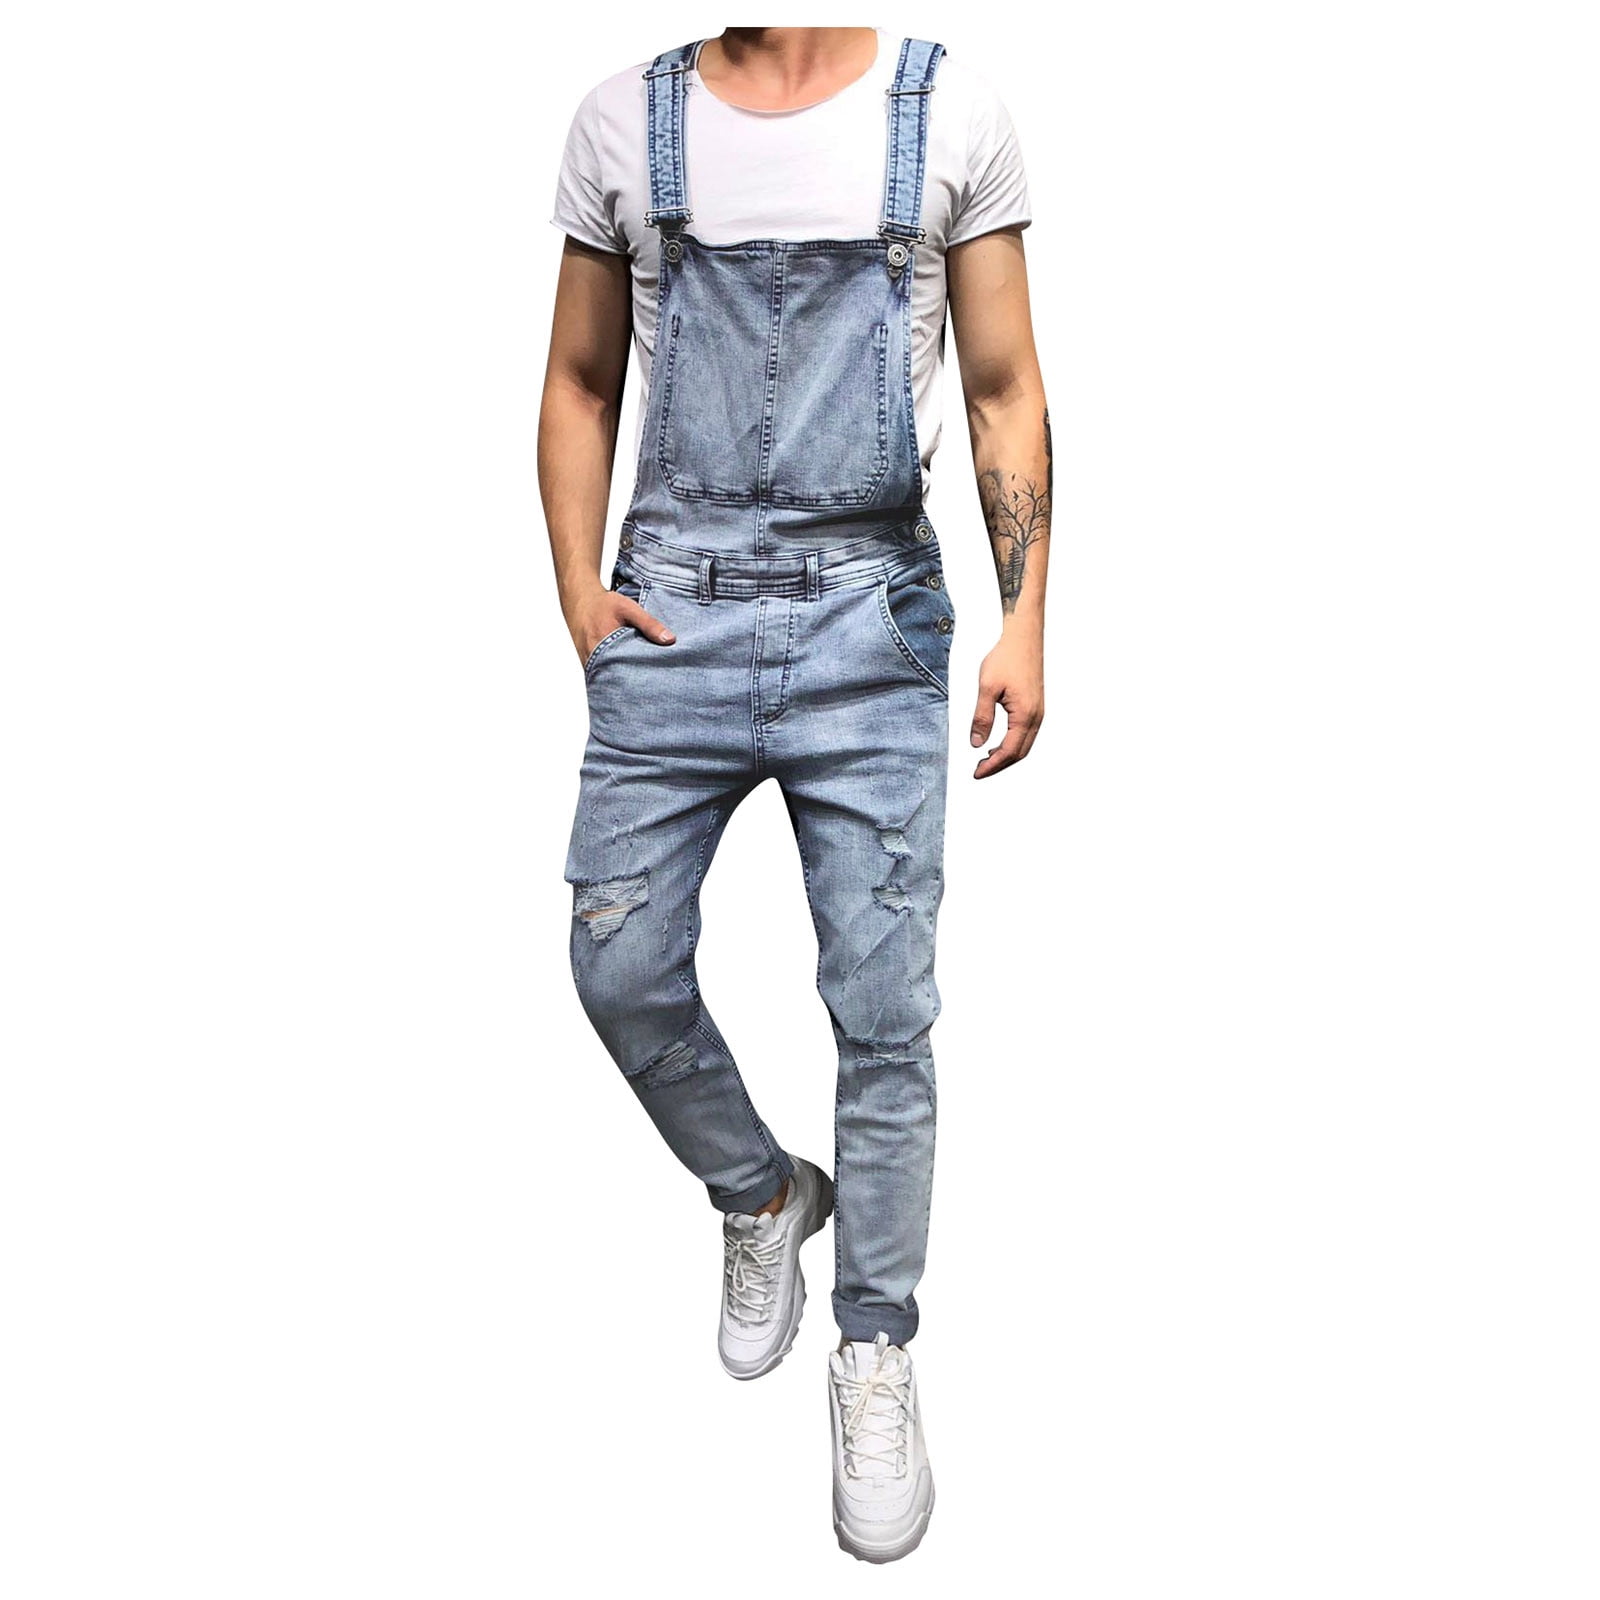 Mens Distressed Denim Mens Denim Jumpsuit With Ripped Bib Overalls And  Suspender Pants Available In Sizes M XXL From Malewardrobe, $103.48 |  DHgate.Com